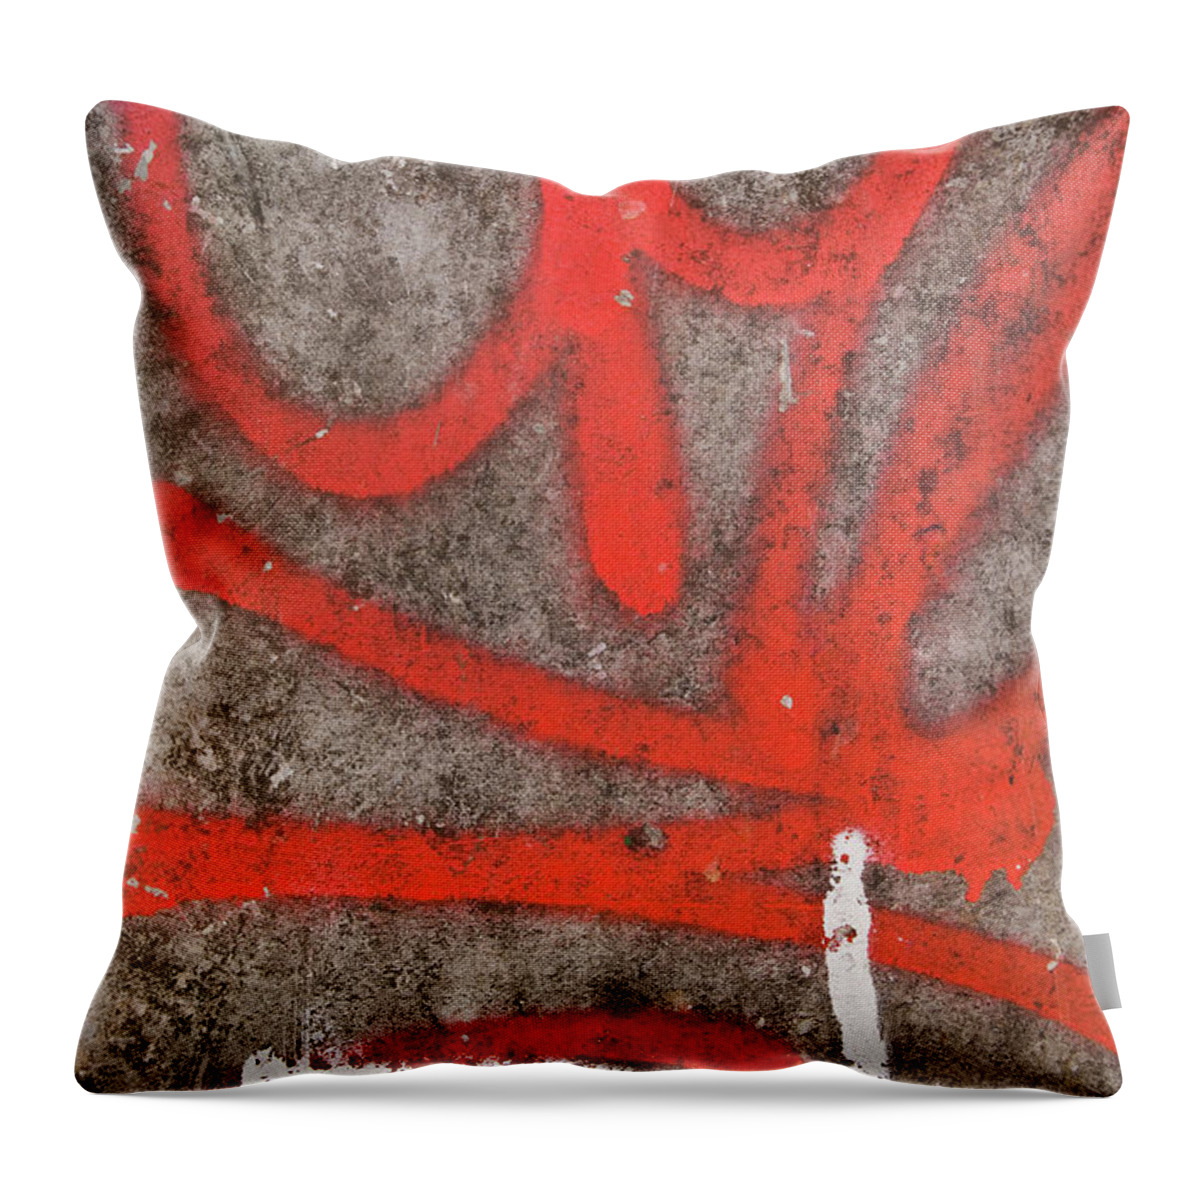 Unhygienic Throw Pillow featuring the photograph Graffiti Grunge Concrete by Shayes17